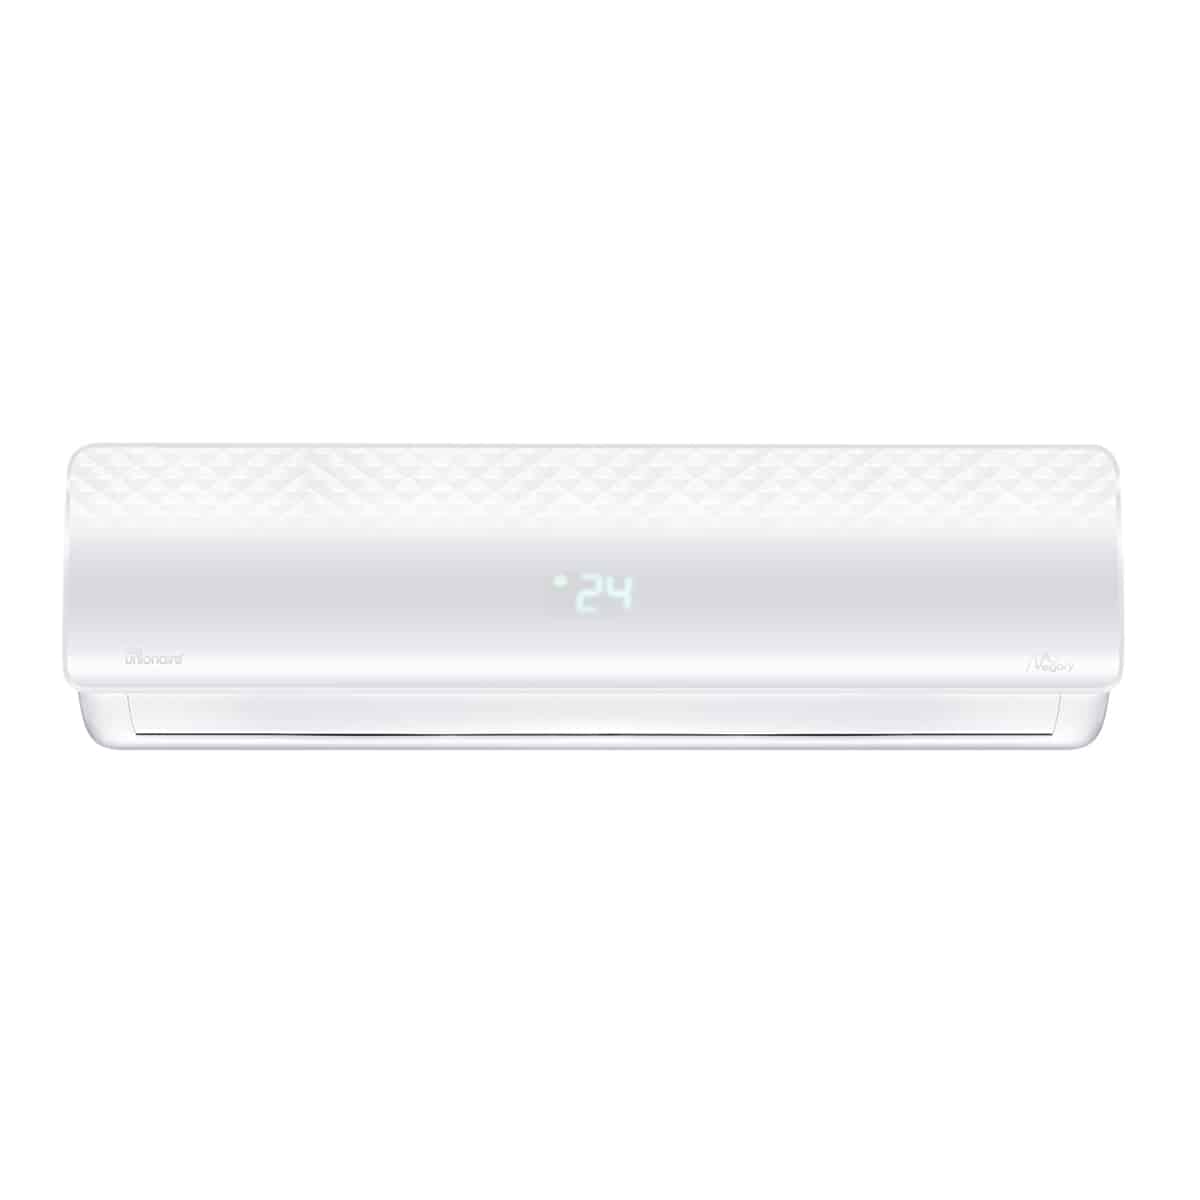 Unionaire Megafy Split Air Conditioner, 2.25H, Cooling, White - 018_CR_R410A